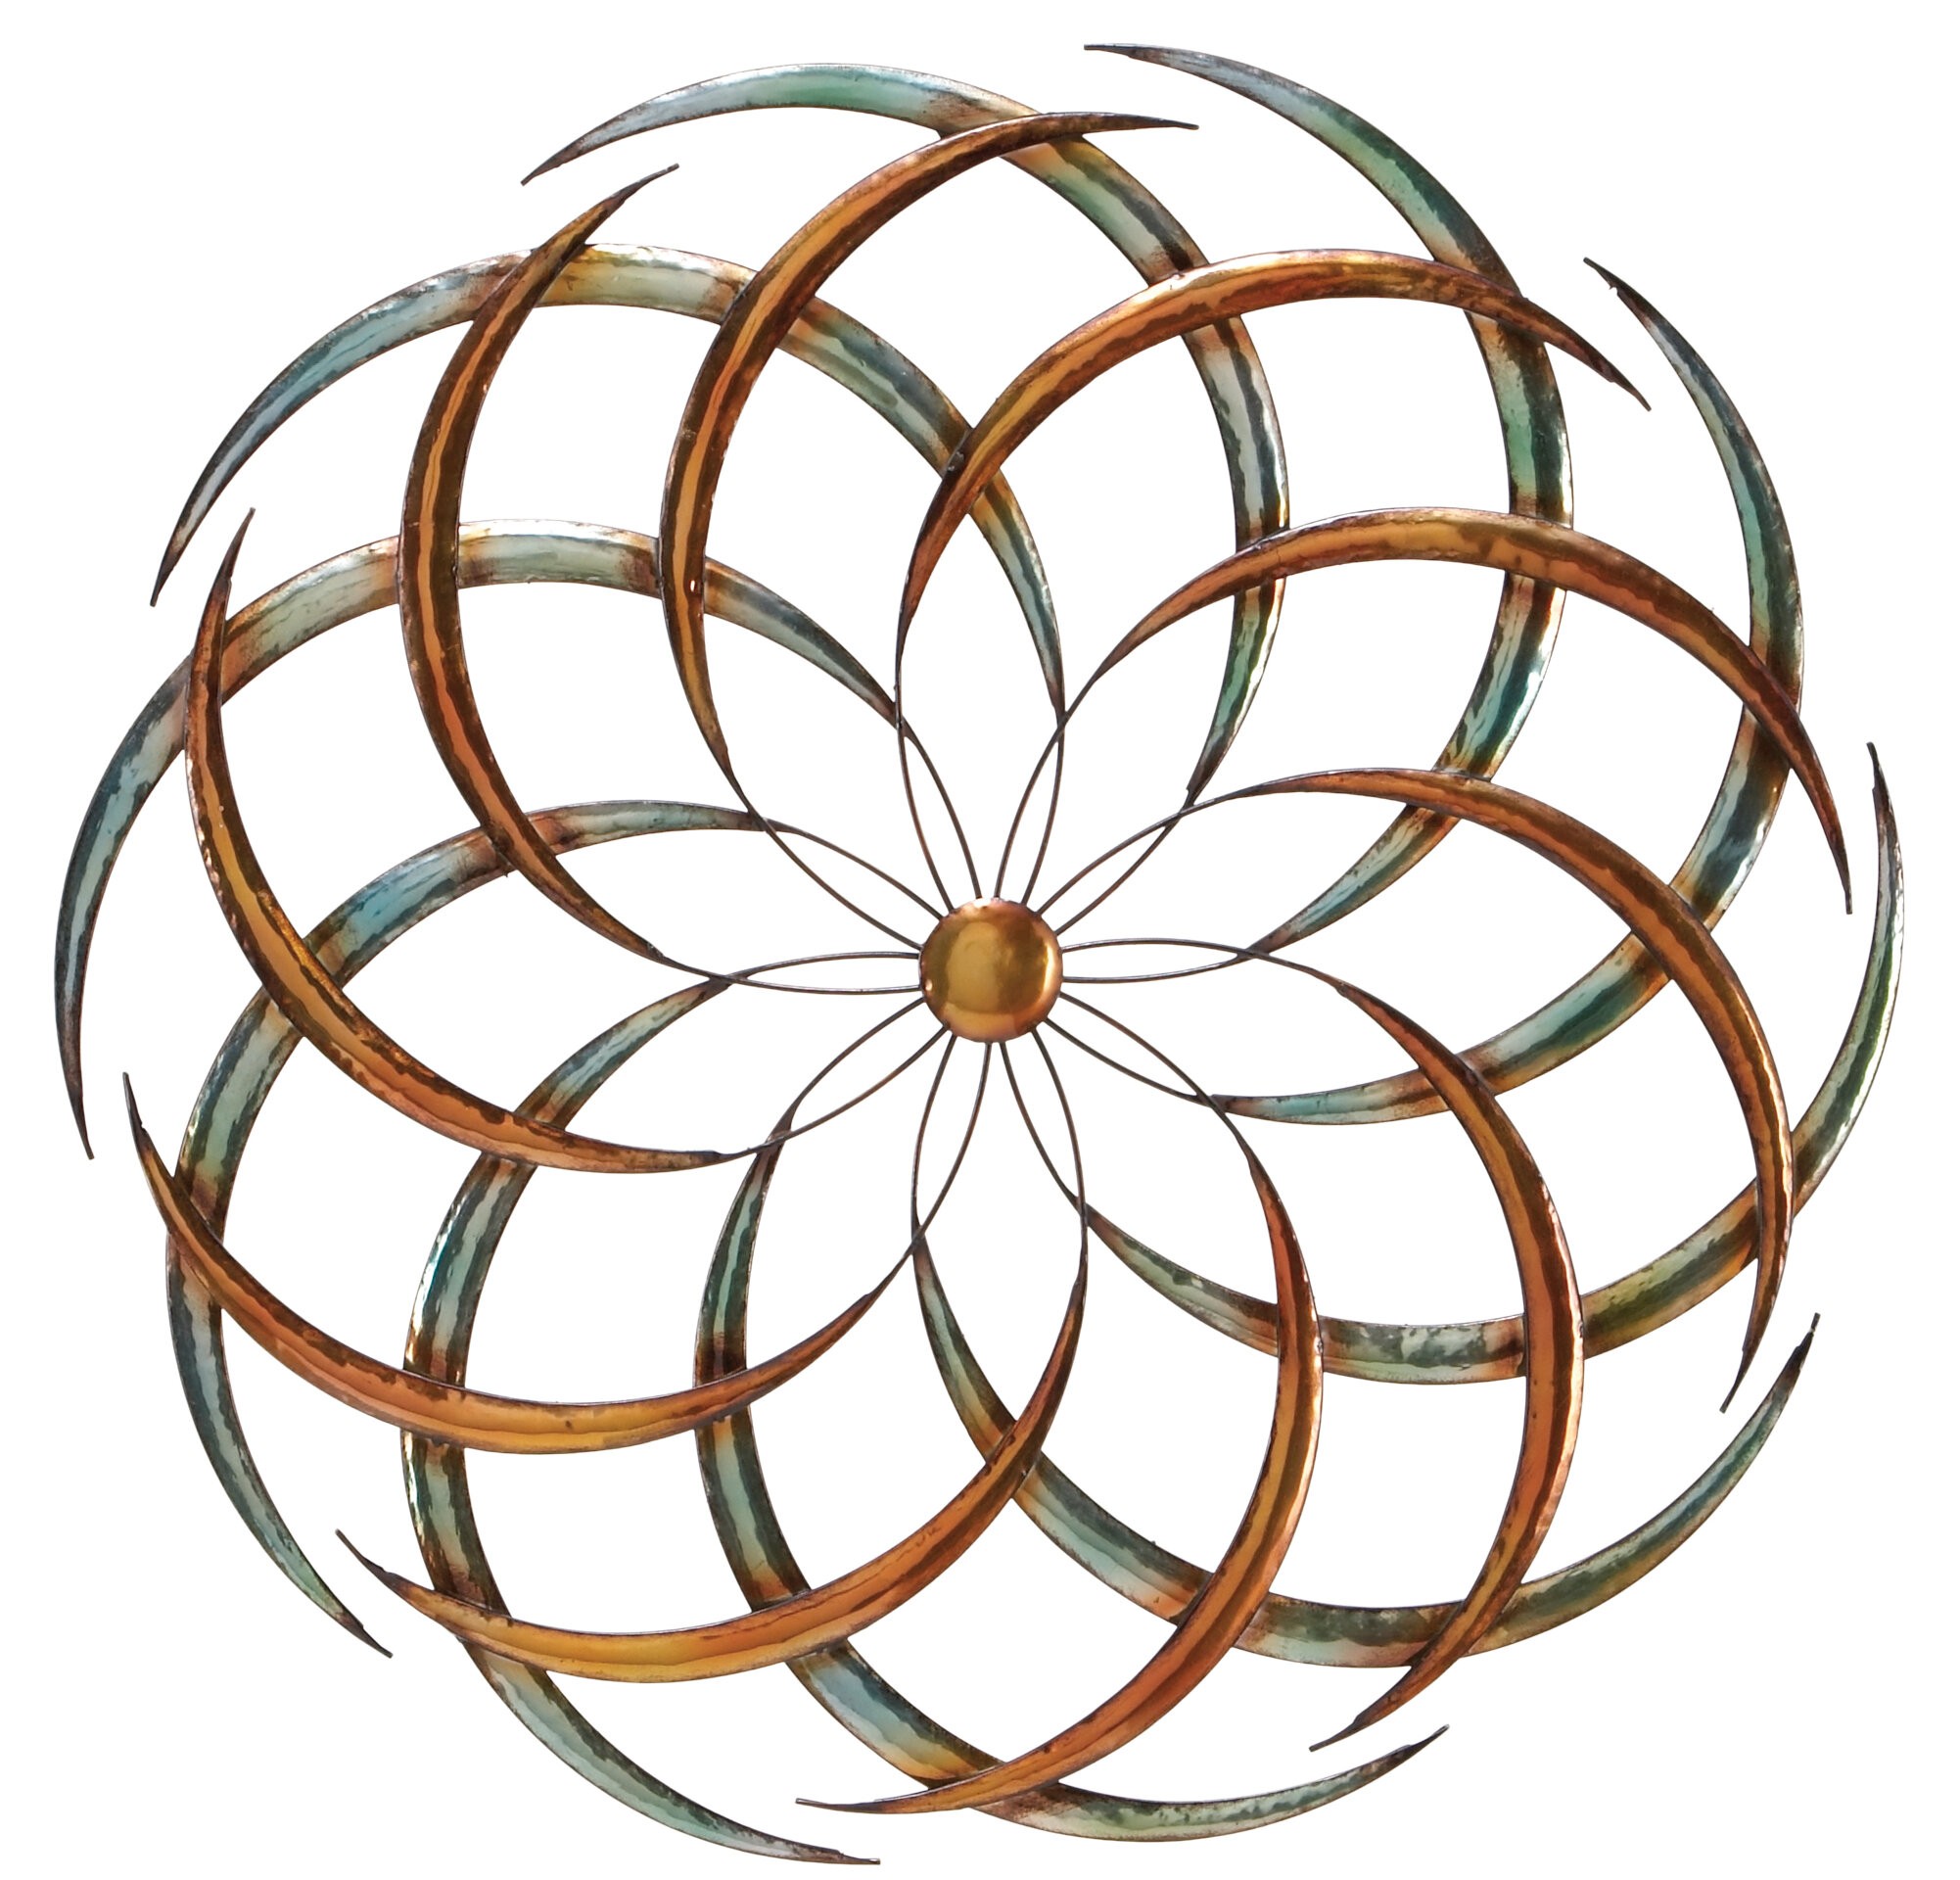 Large Contemporary Abstract Art Wall Hanging Round Iron Decor Metal Plaque